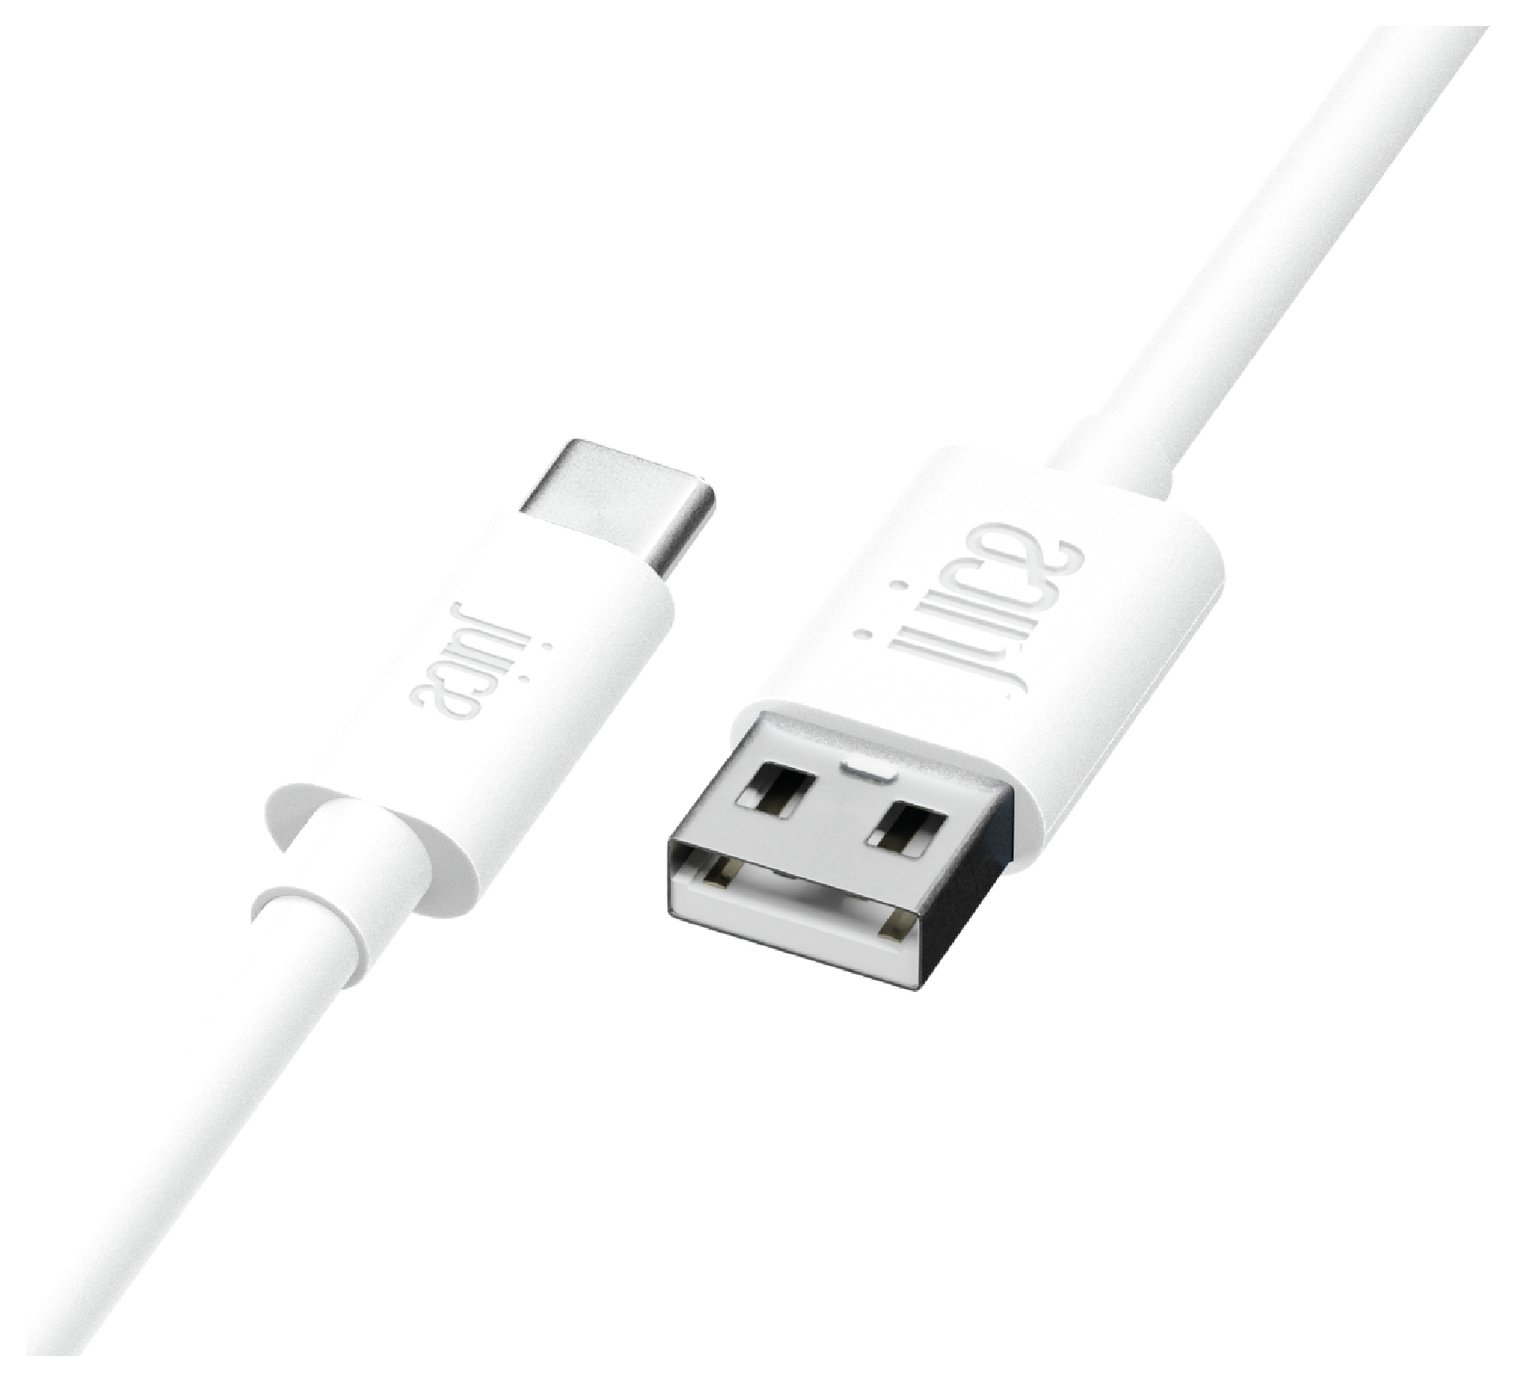 Juice USB A to USB C 3m Charge Cable - White